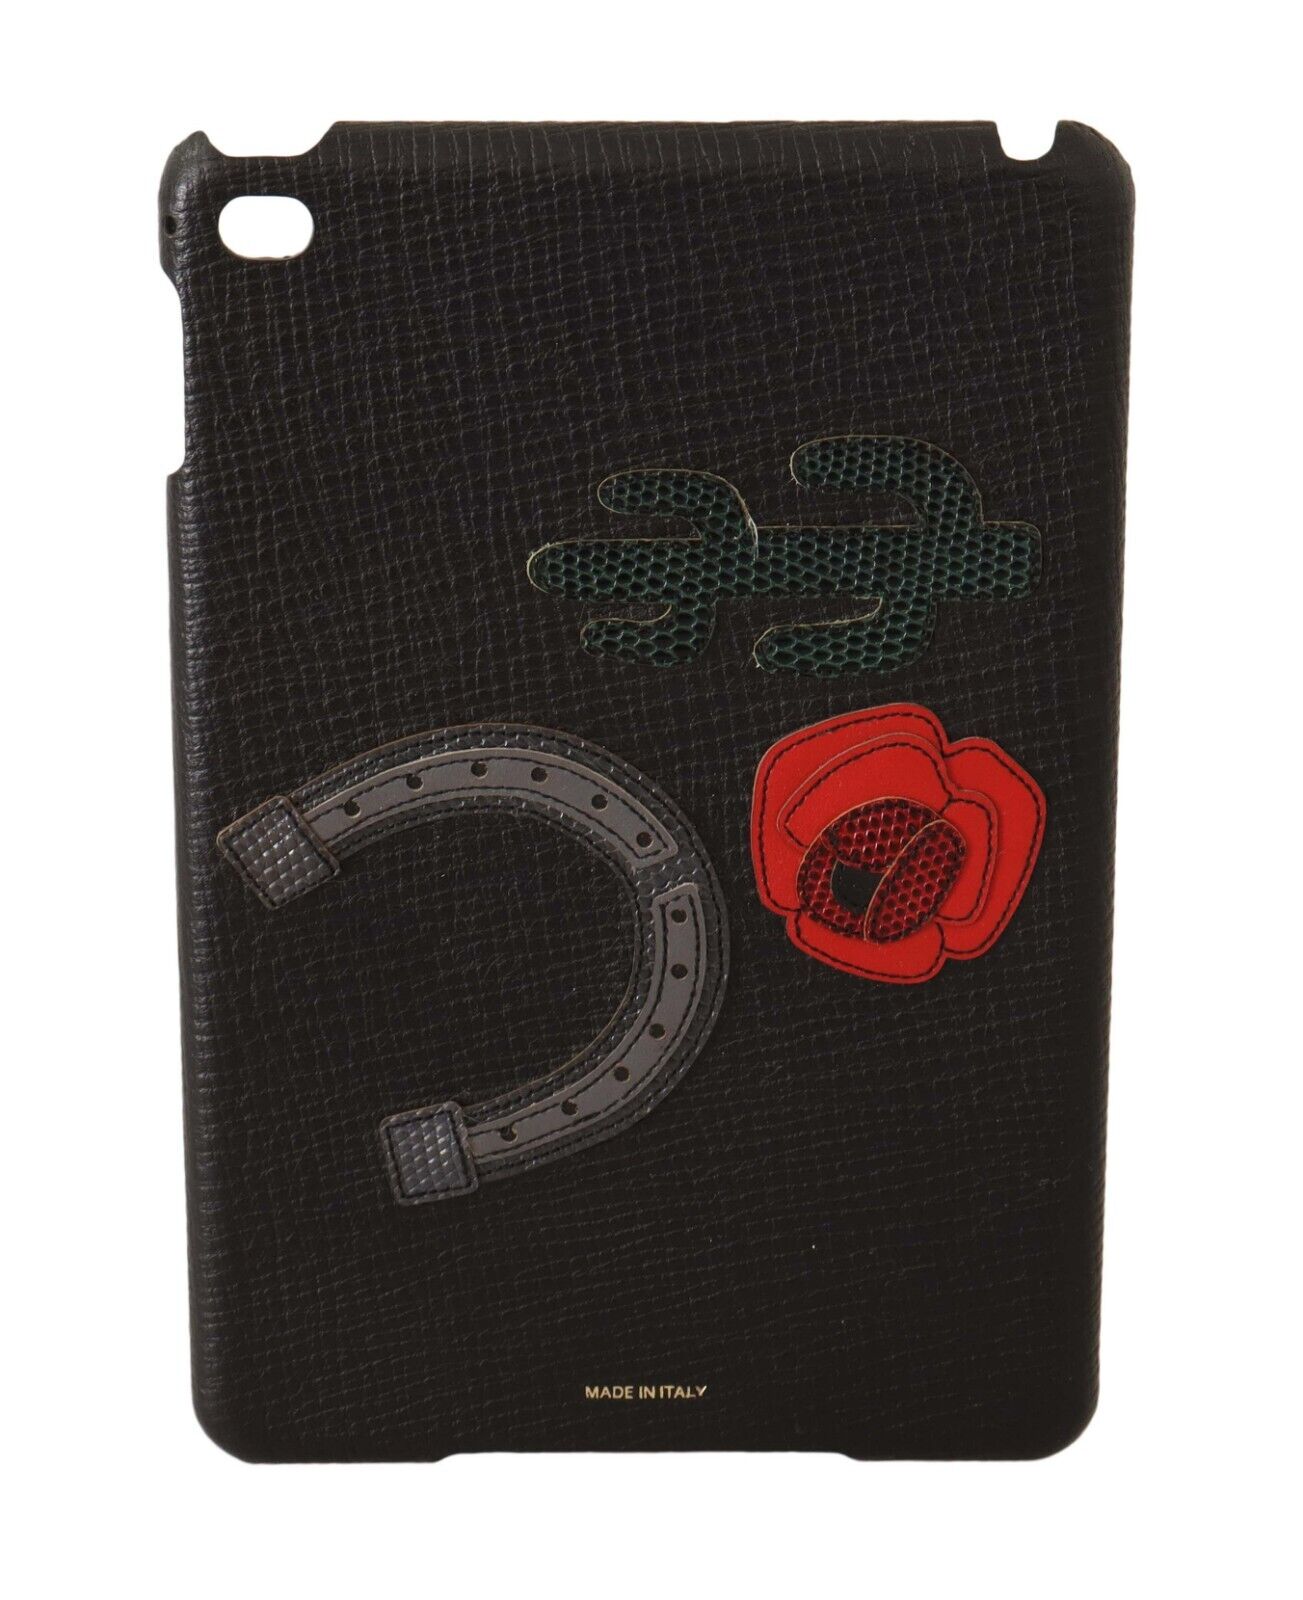 DOLCE & GABBANA Tablet Fitted Case Skin Leather Horseshoe Patch iPad mini $400